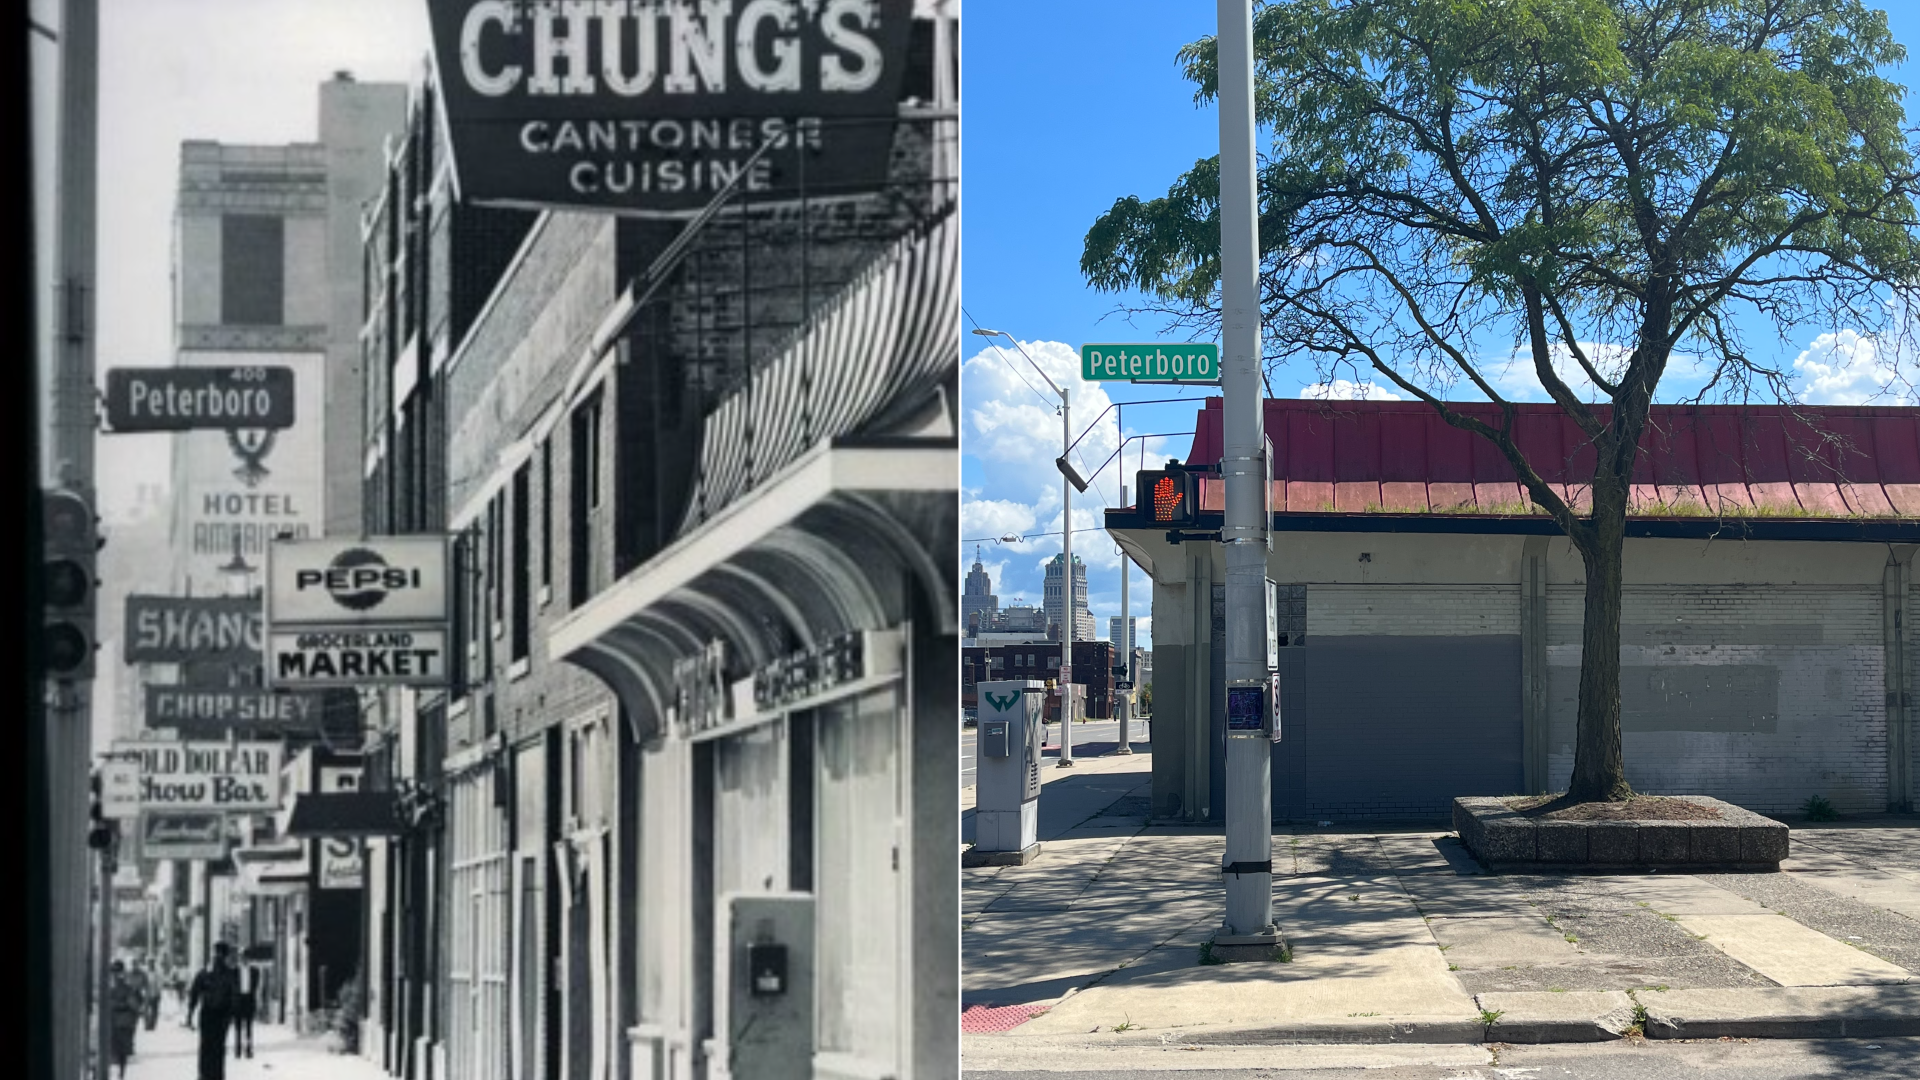 An old picture of Chung's restaurant, on the left, next to a present-day photo of the building